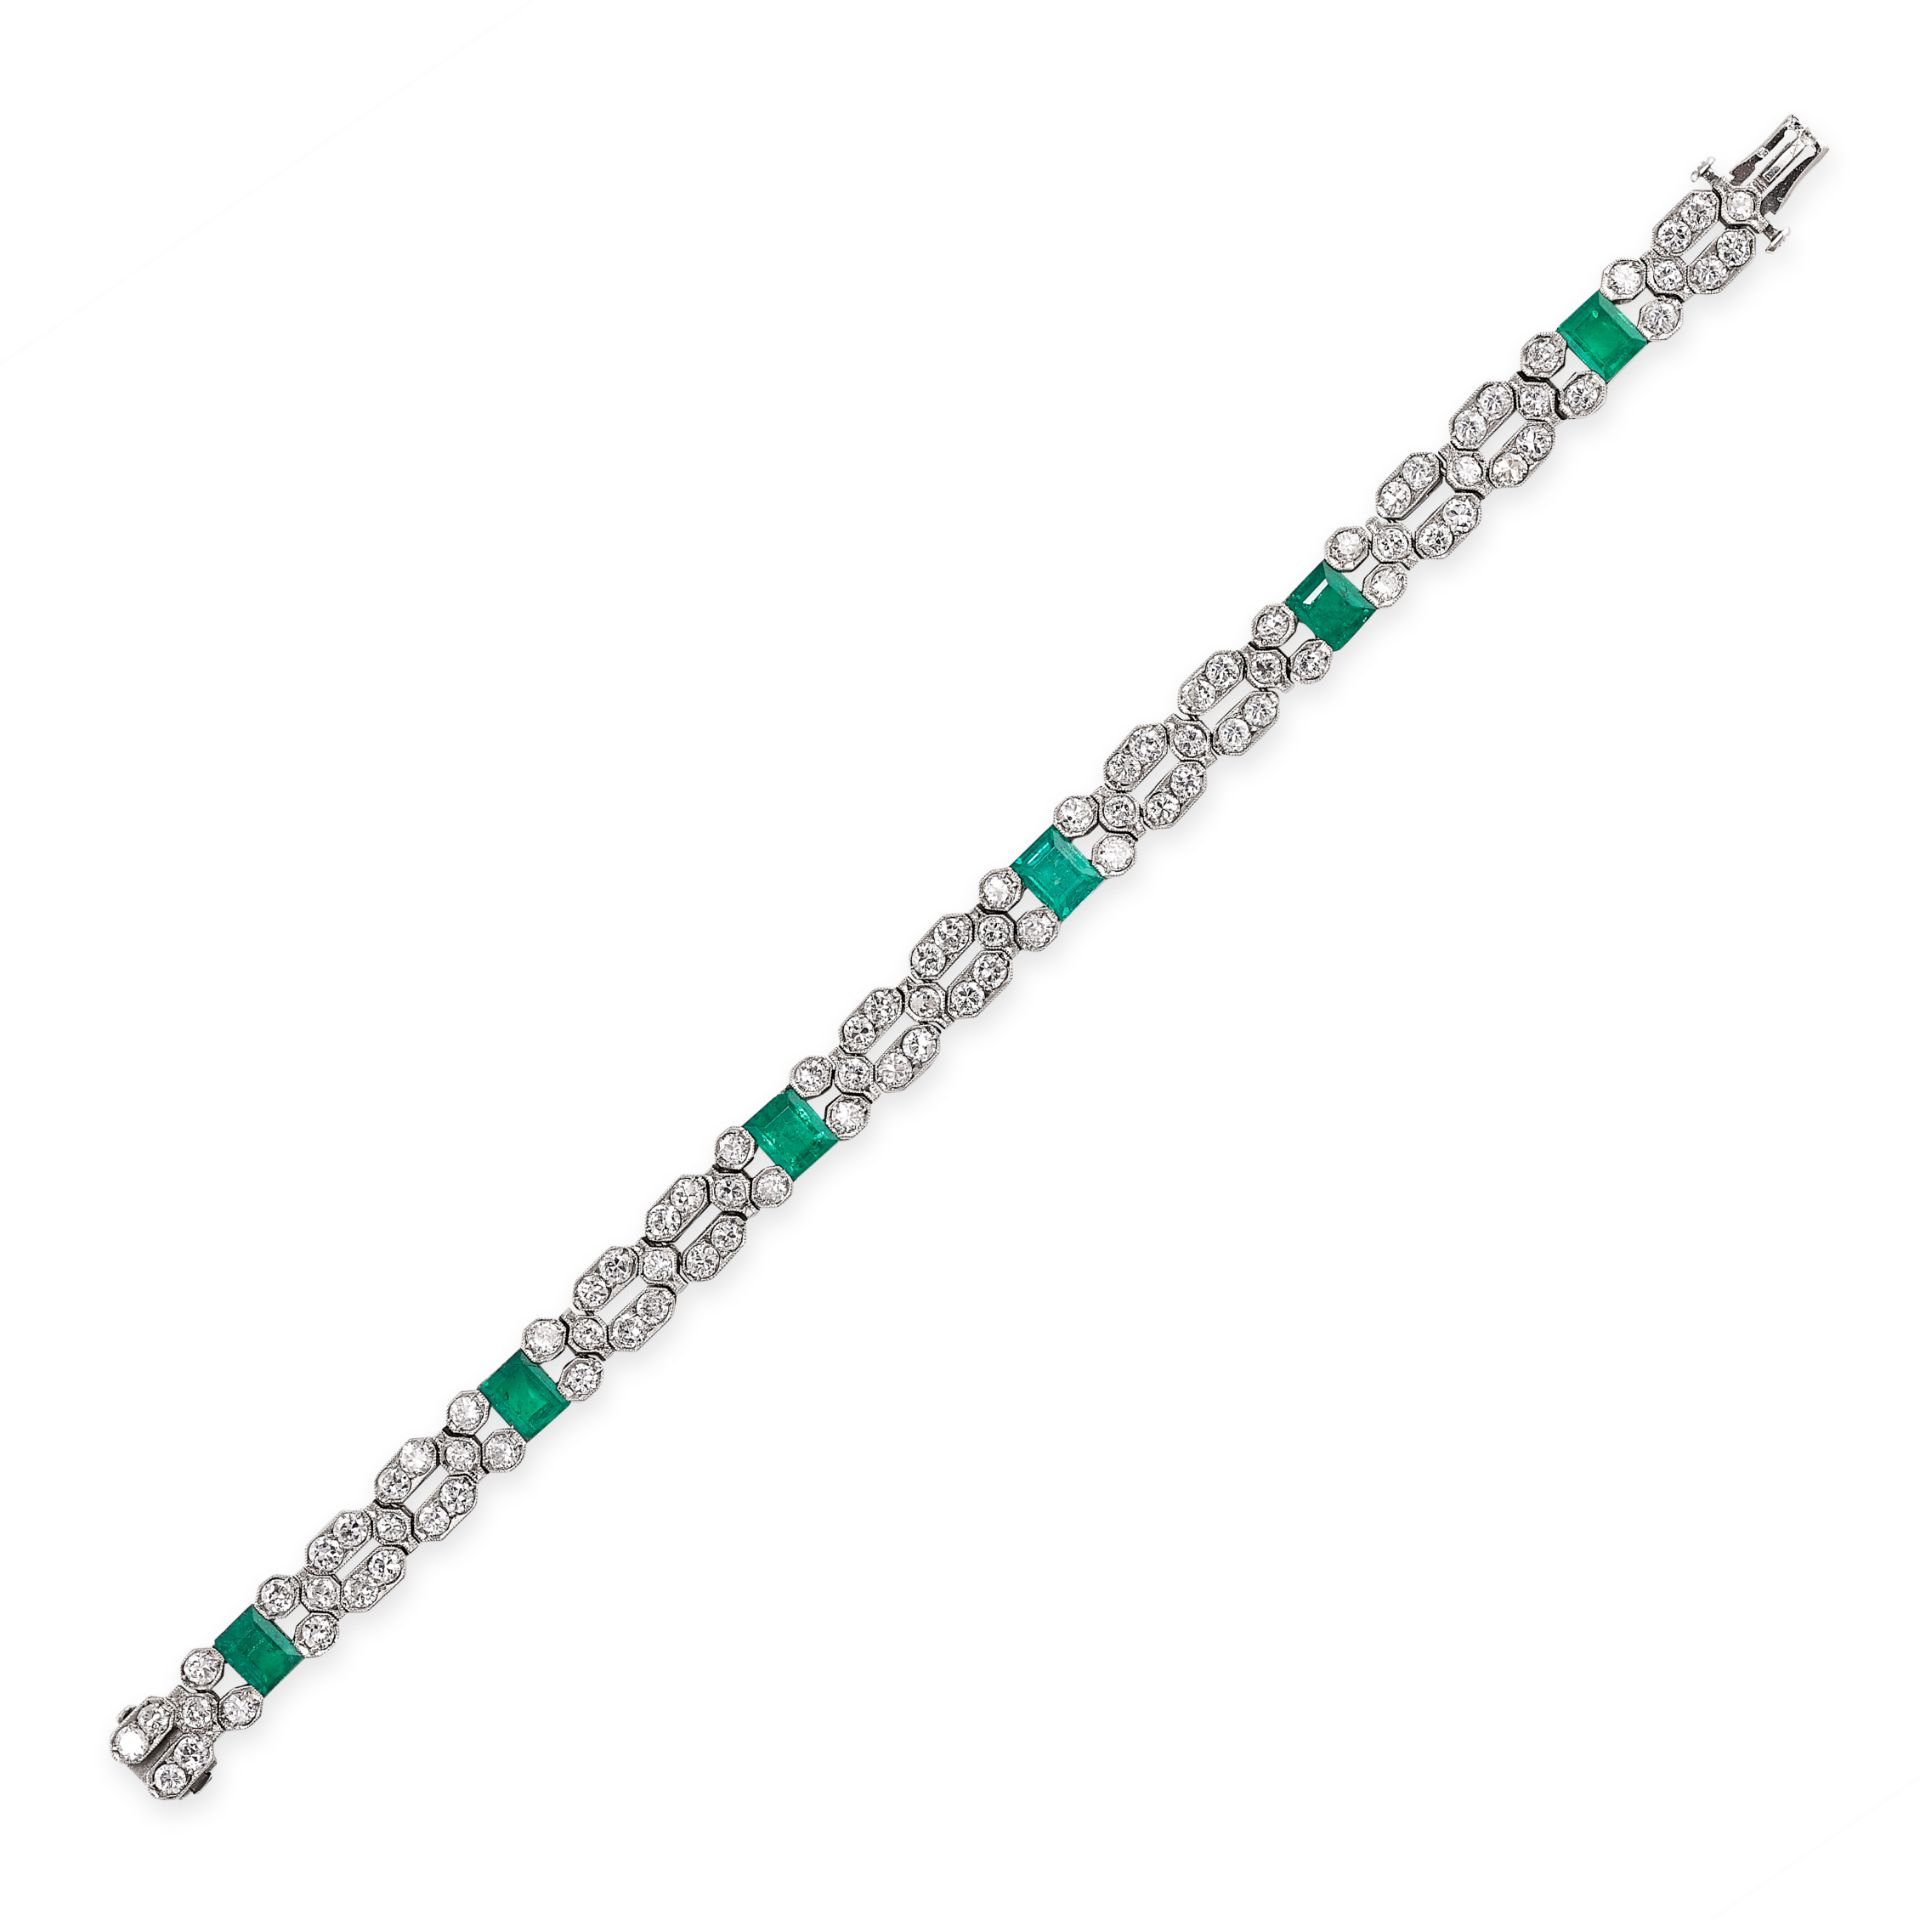 AN ART DECO EMERALD AND DIAMOND BRACELET, CHARLES HOLL in platinum and 18ct white gold, set with six